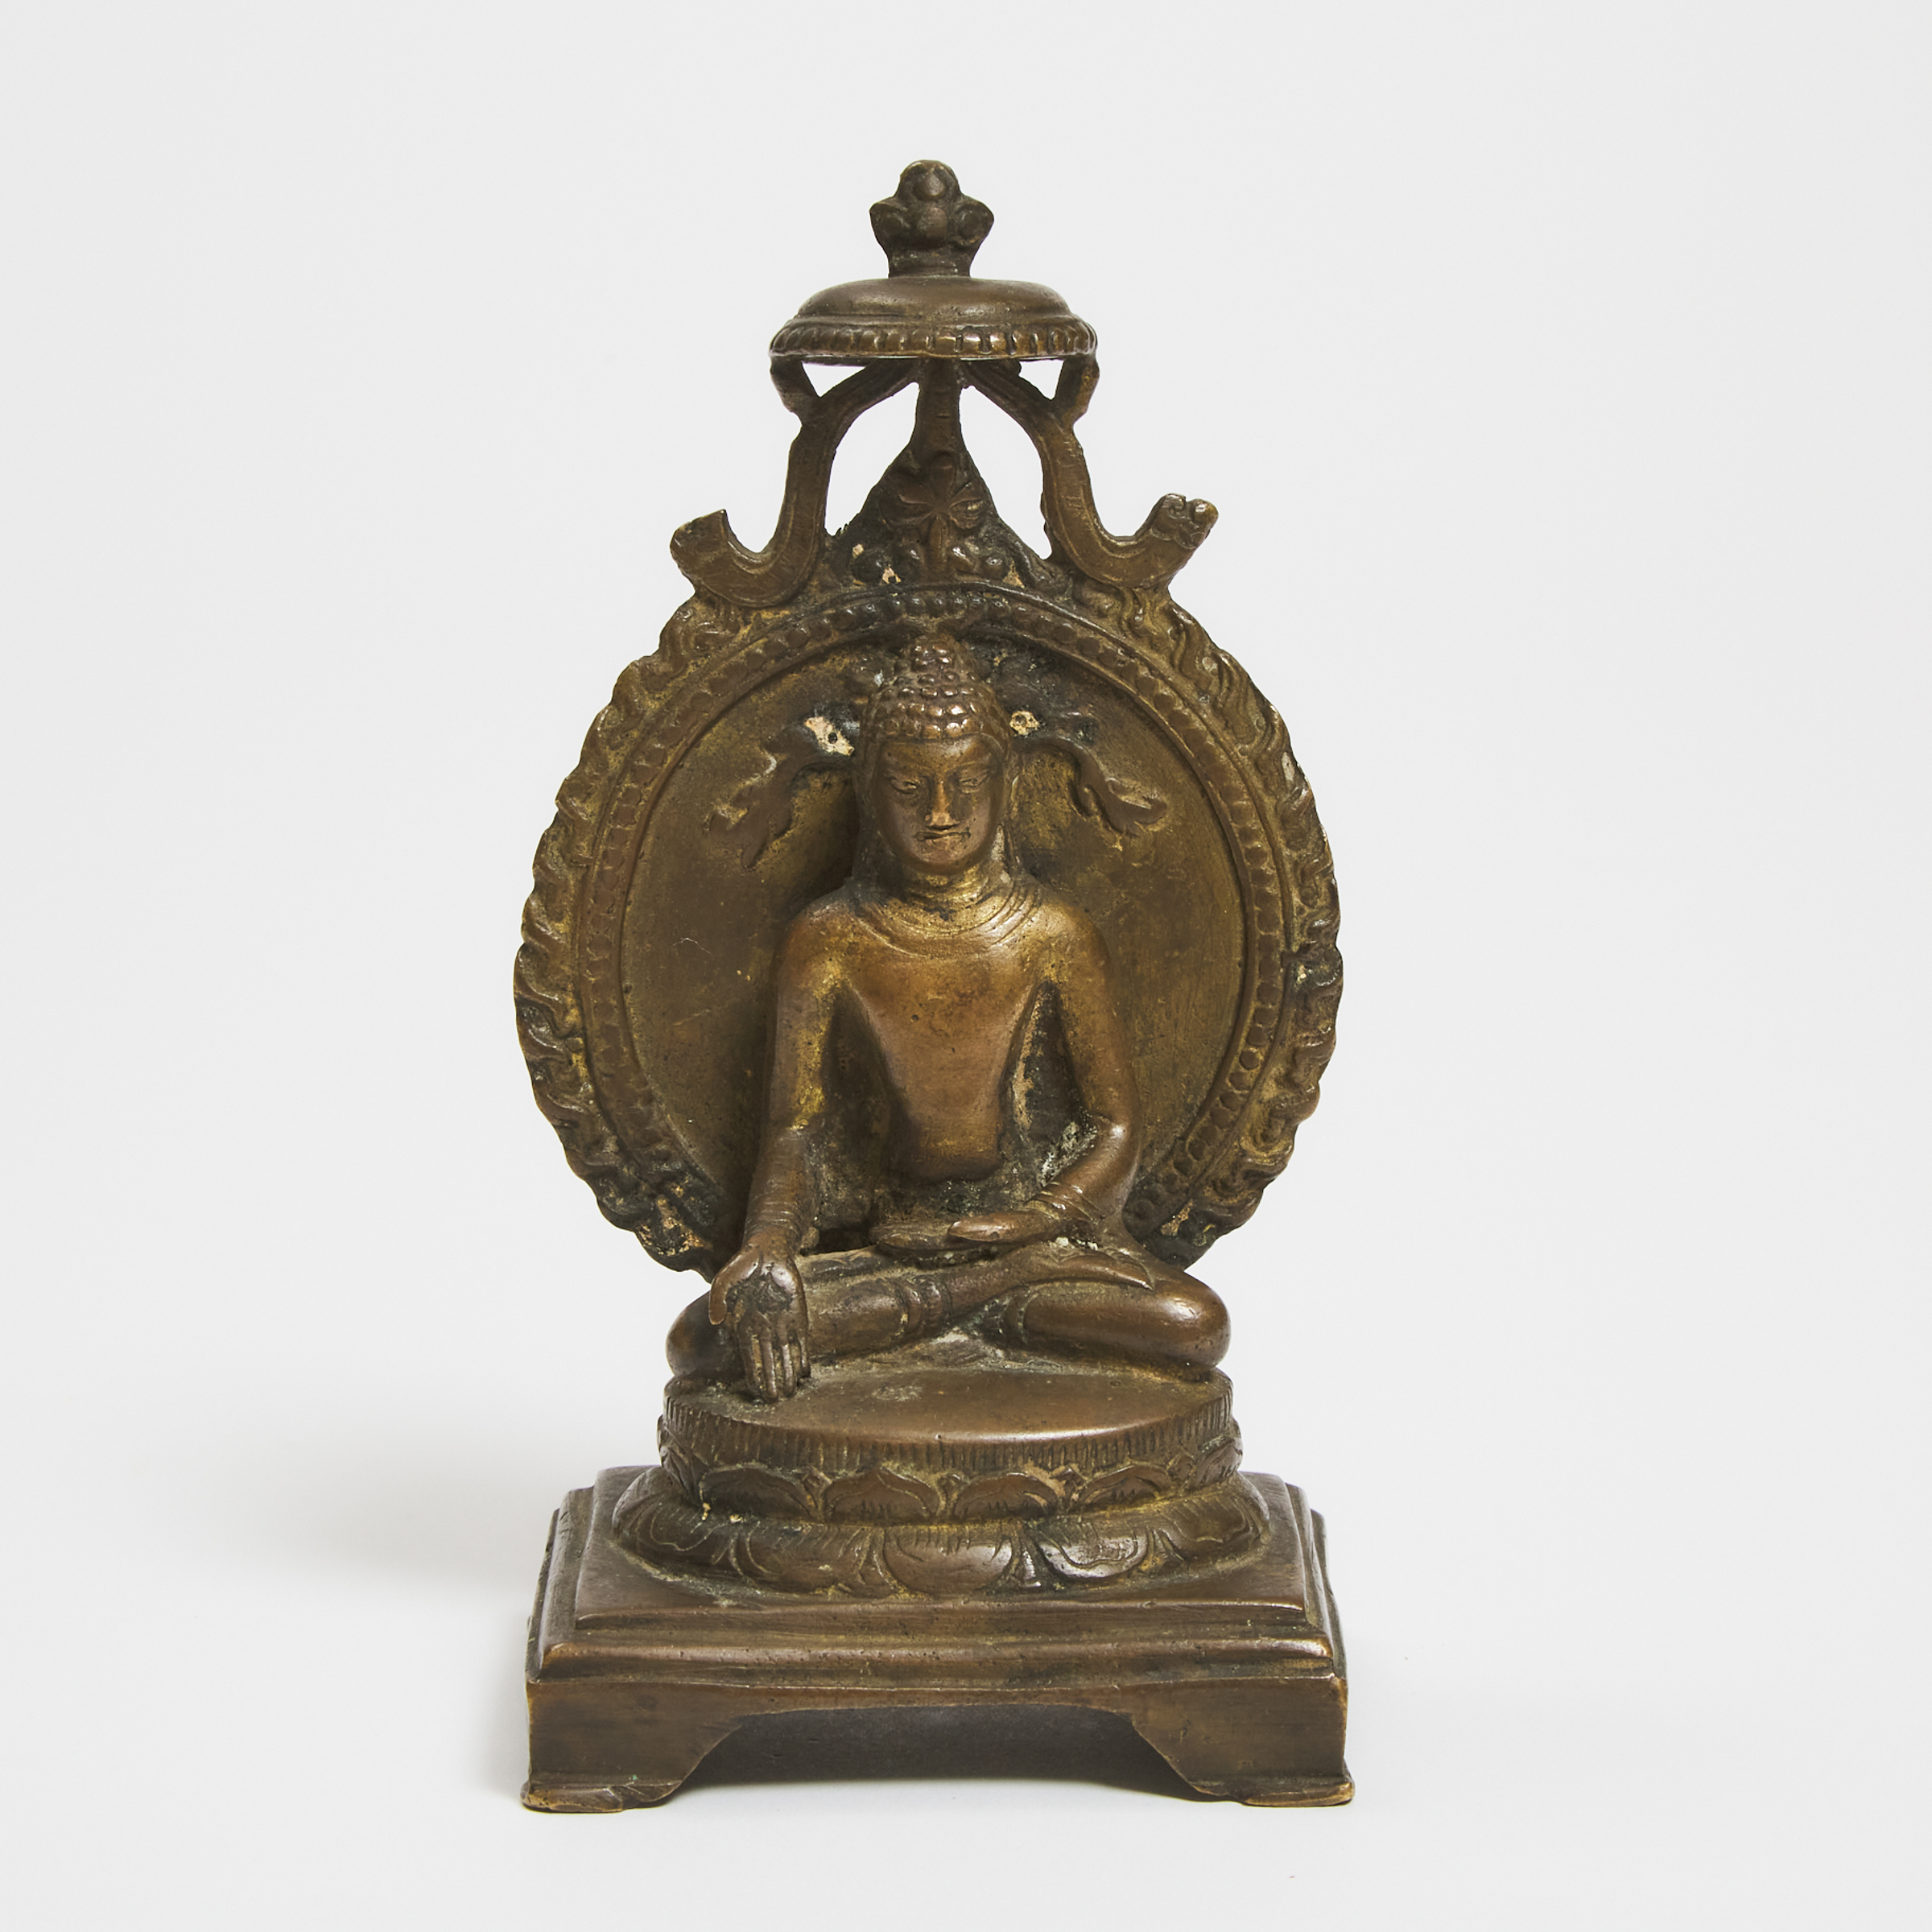 A Nepalese Bronze Figure of Buddha, 19th Century or Earlier